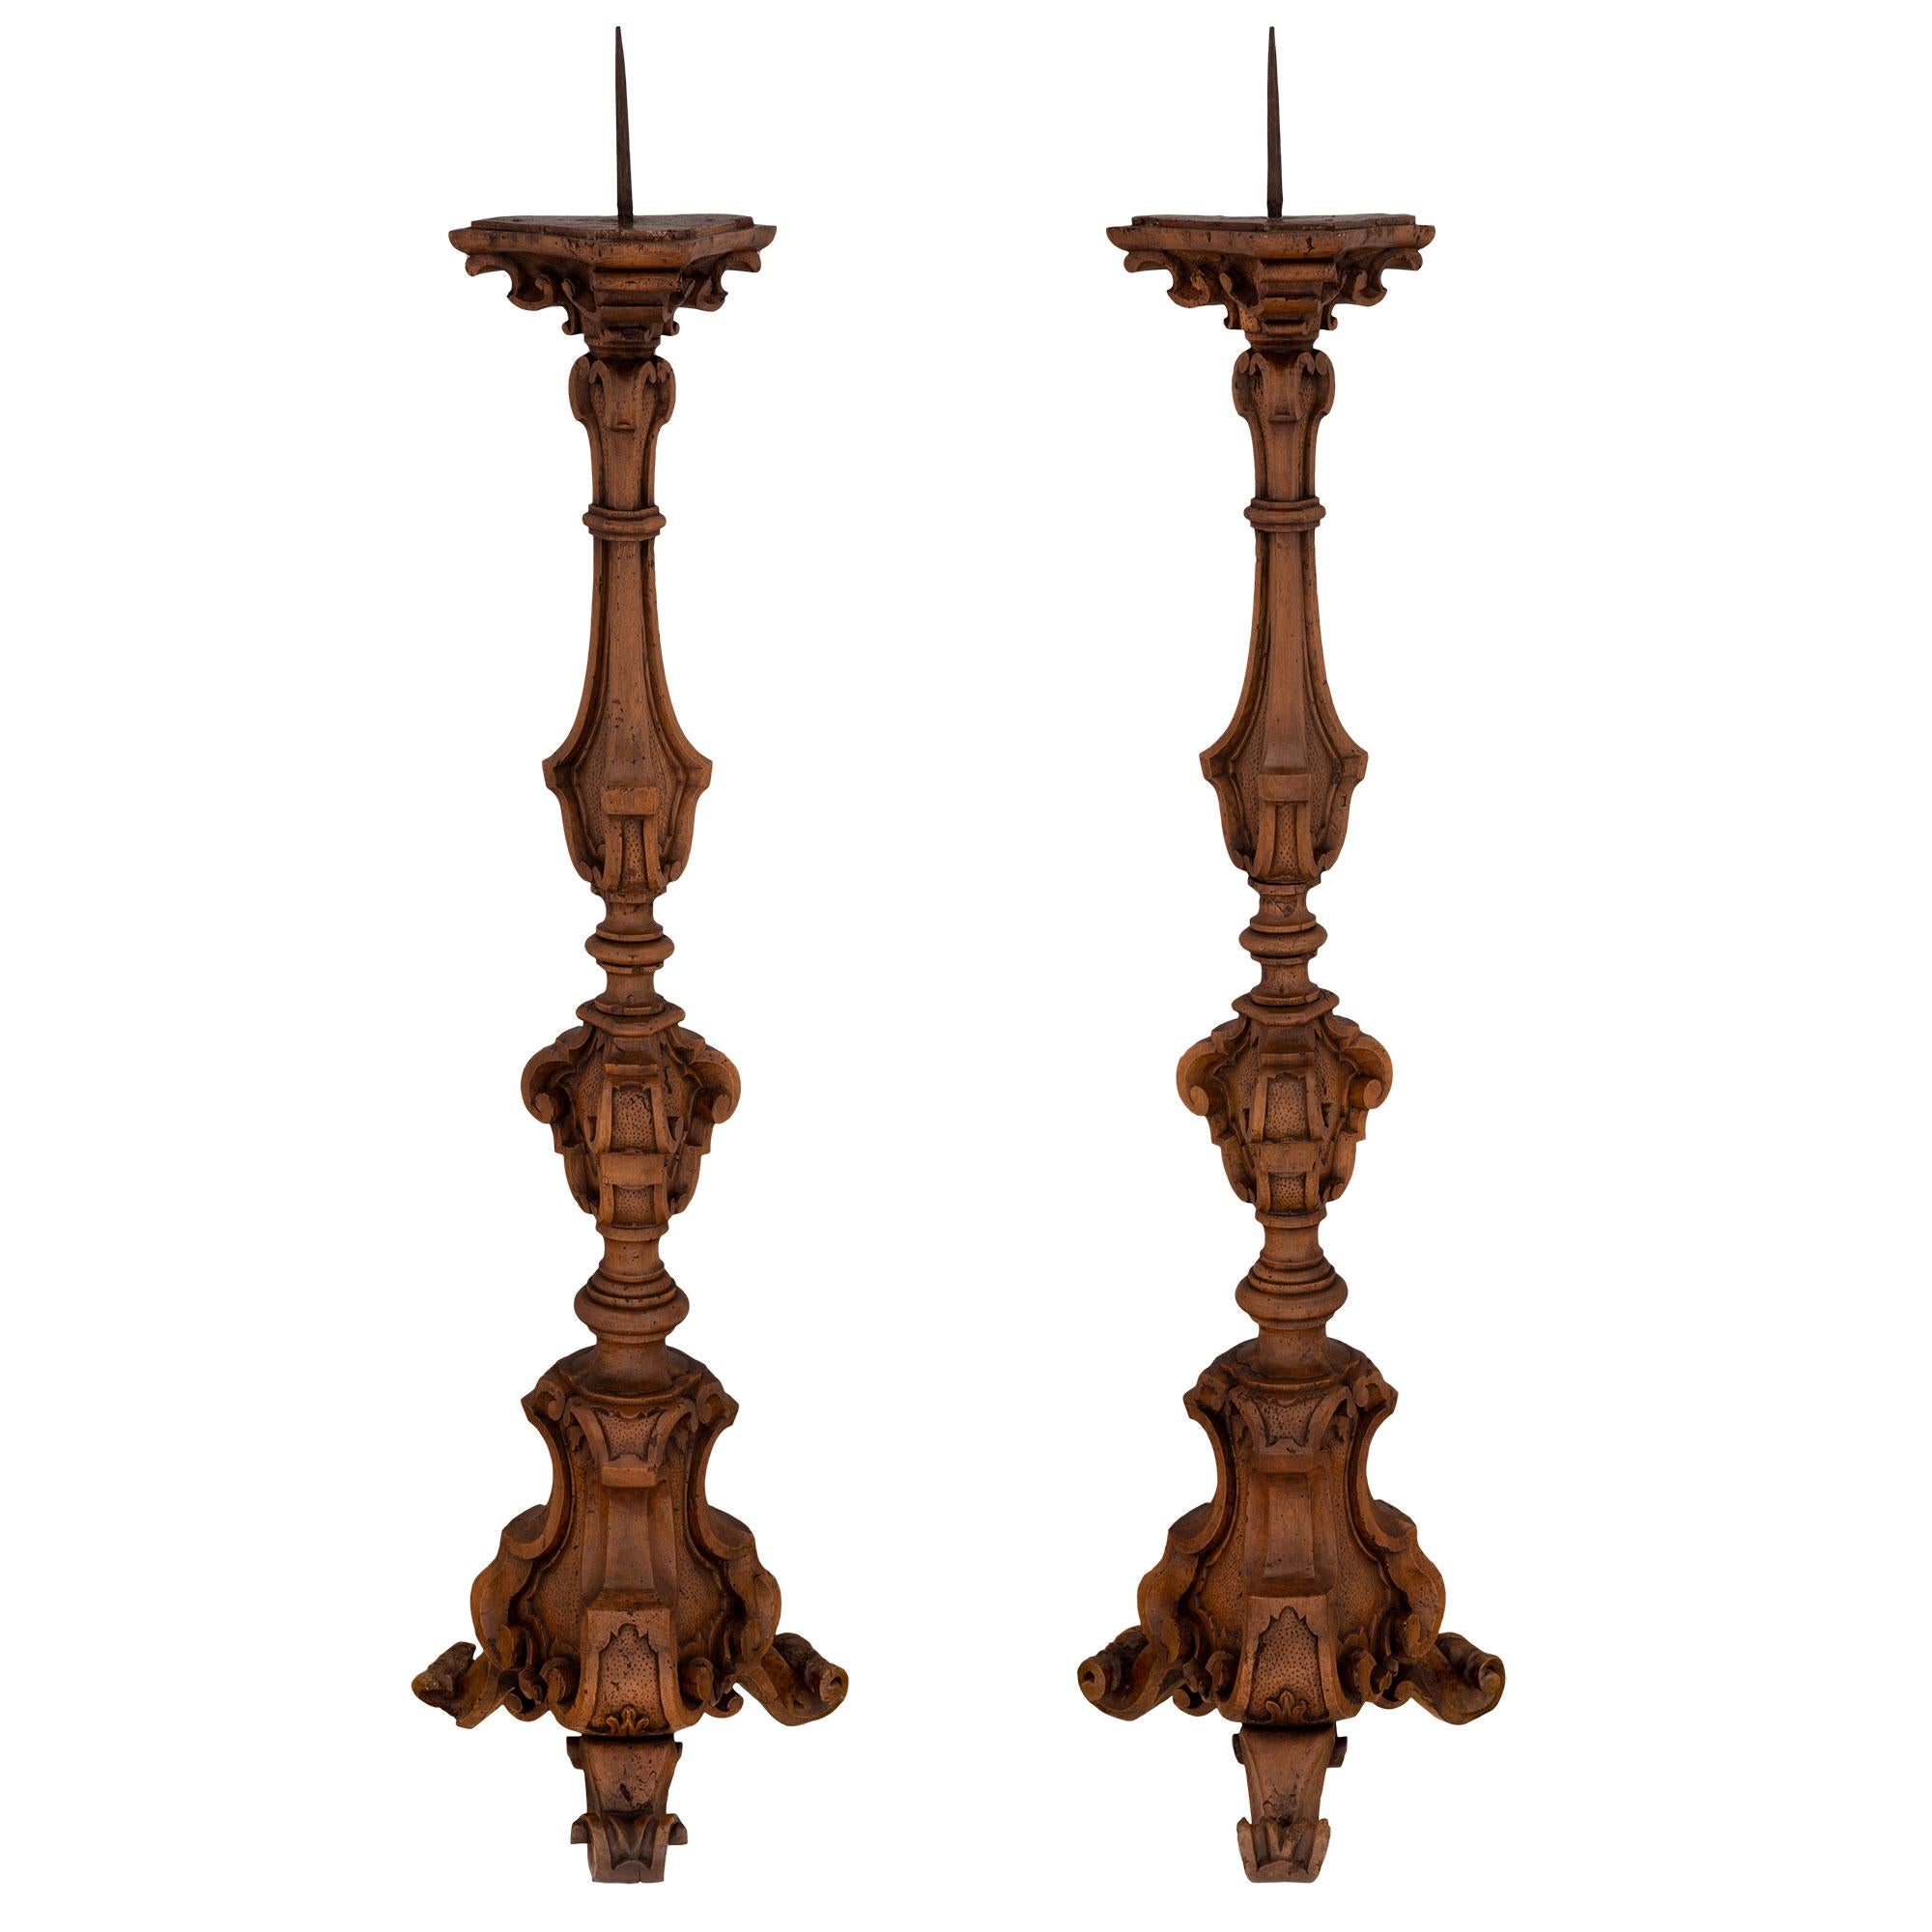 An impressive and most decorative pair of Italian 18th century Regence st. solid walnut Torchières. Each Torchière is raised by three scrolled feet below the beautiful and uniquely shaped carved supports with fine hammered designs. The central